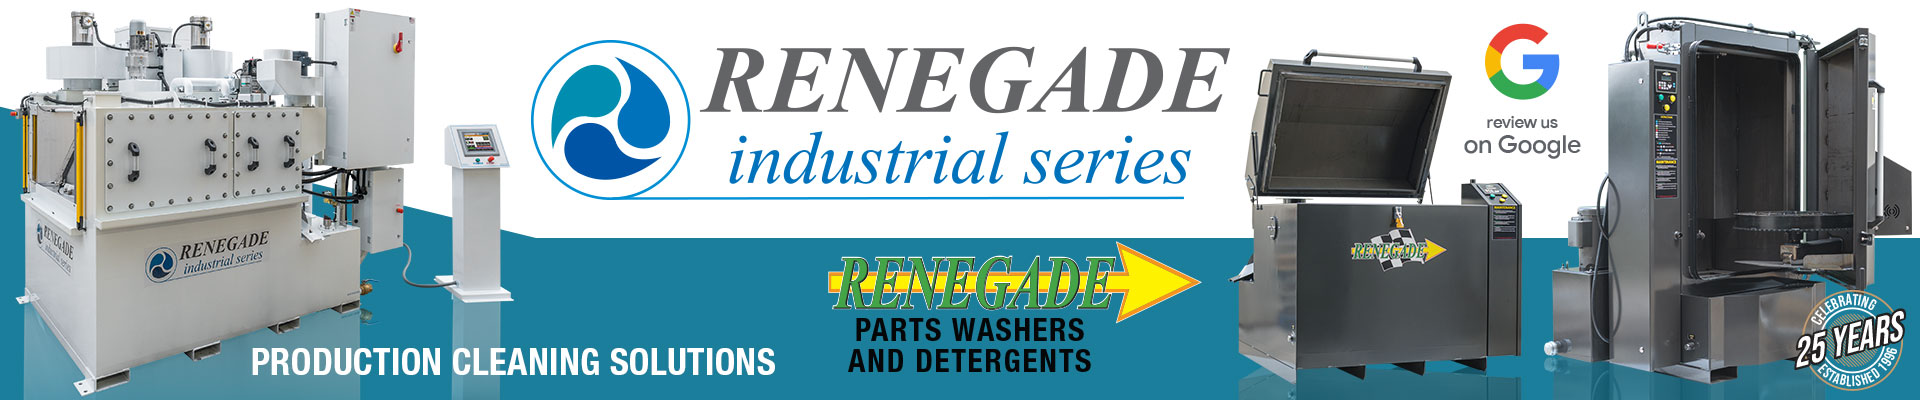 Renegade Parts Washers and Detergents